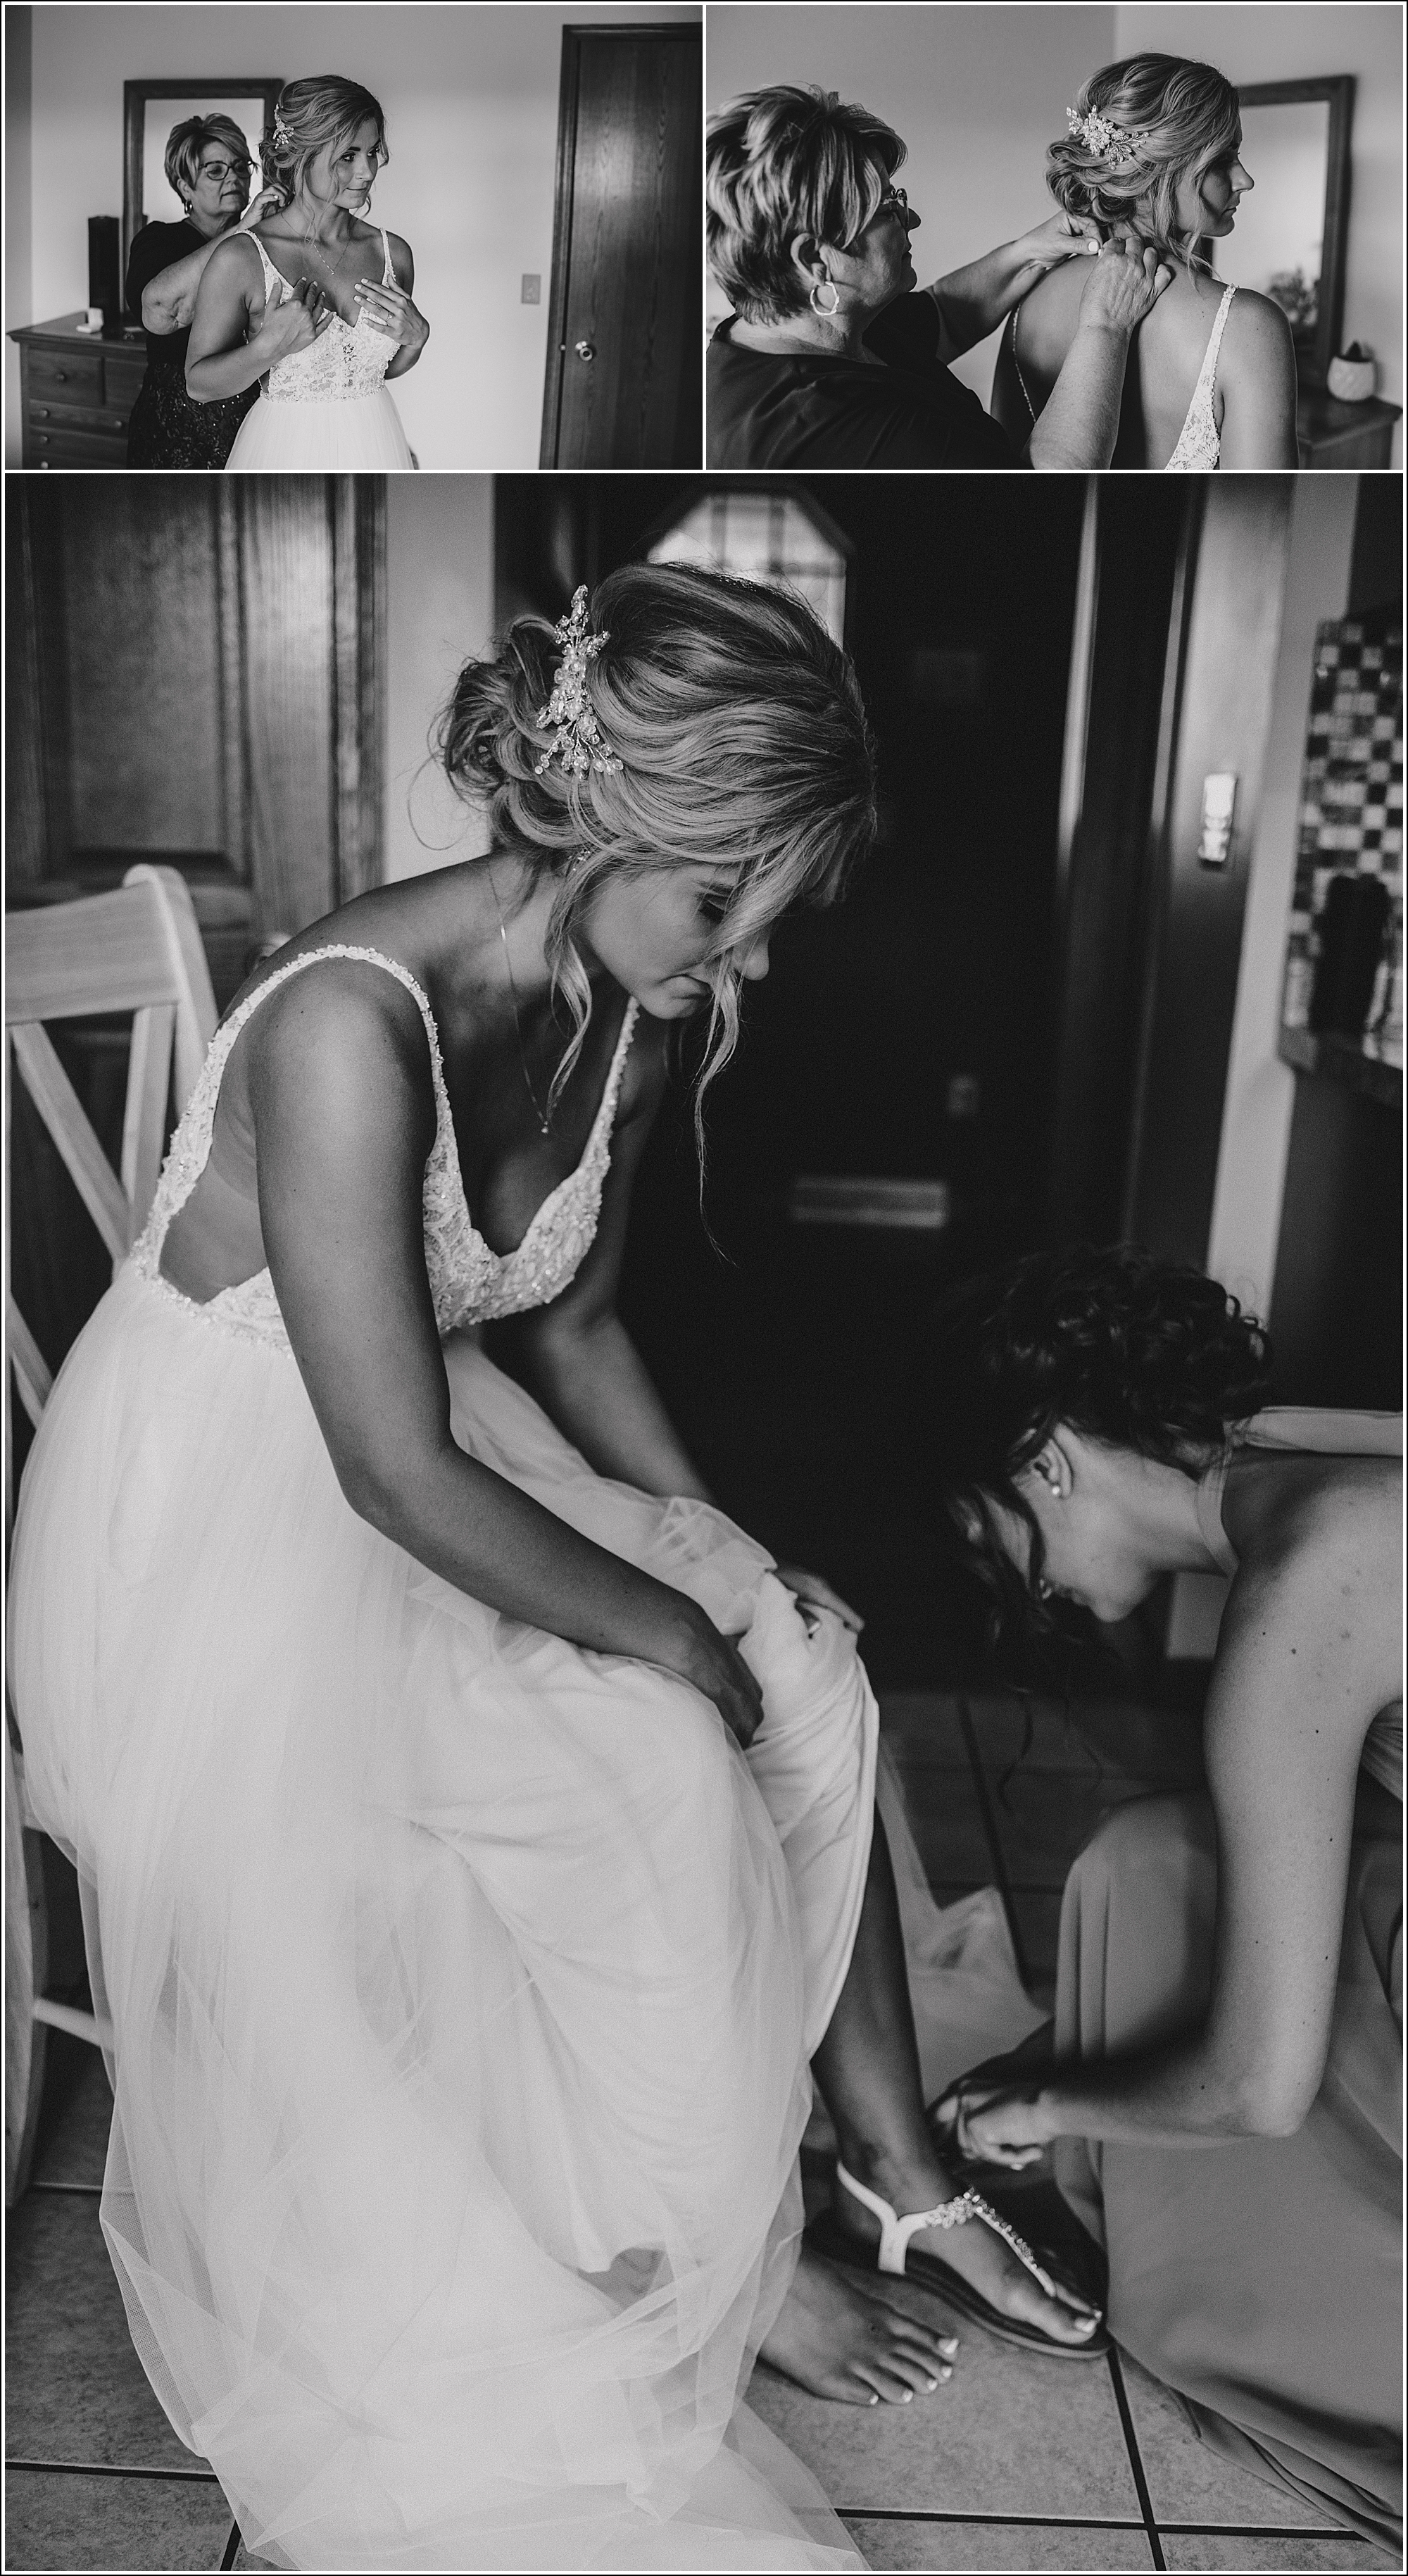 la crosse wi wedding black and white bride getting ready putting jewelry shoes on